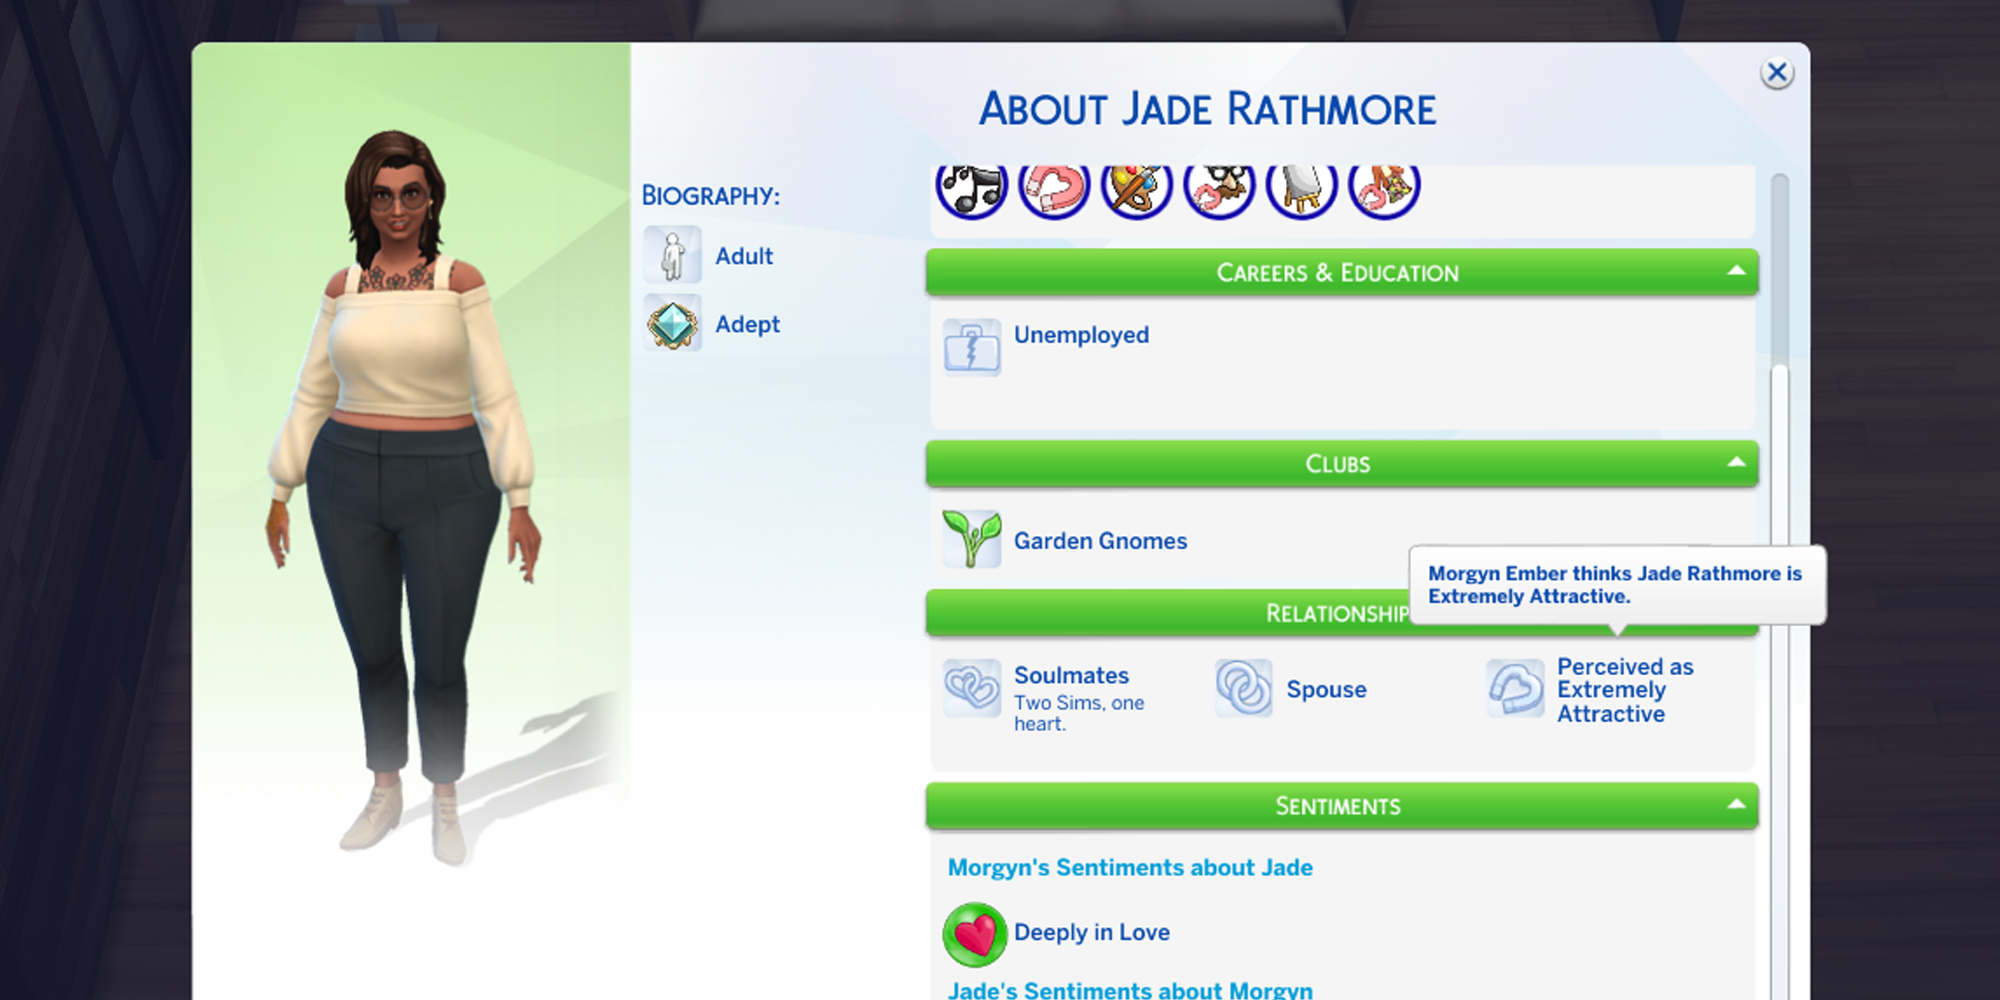 The Sims 4 Friend Menu, showing in the relationships tab the level of attractiveness perceived by the Sim selected. 